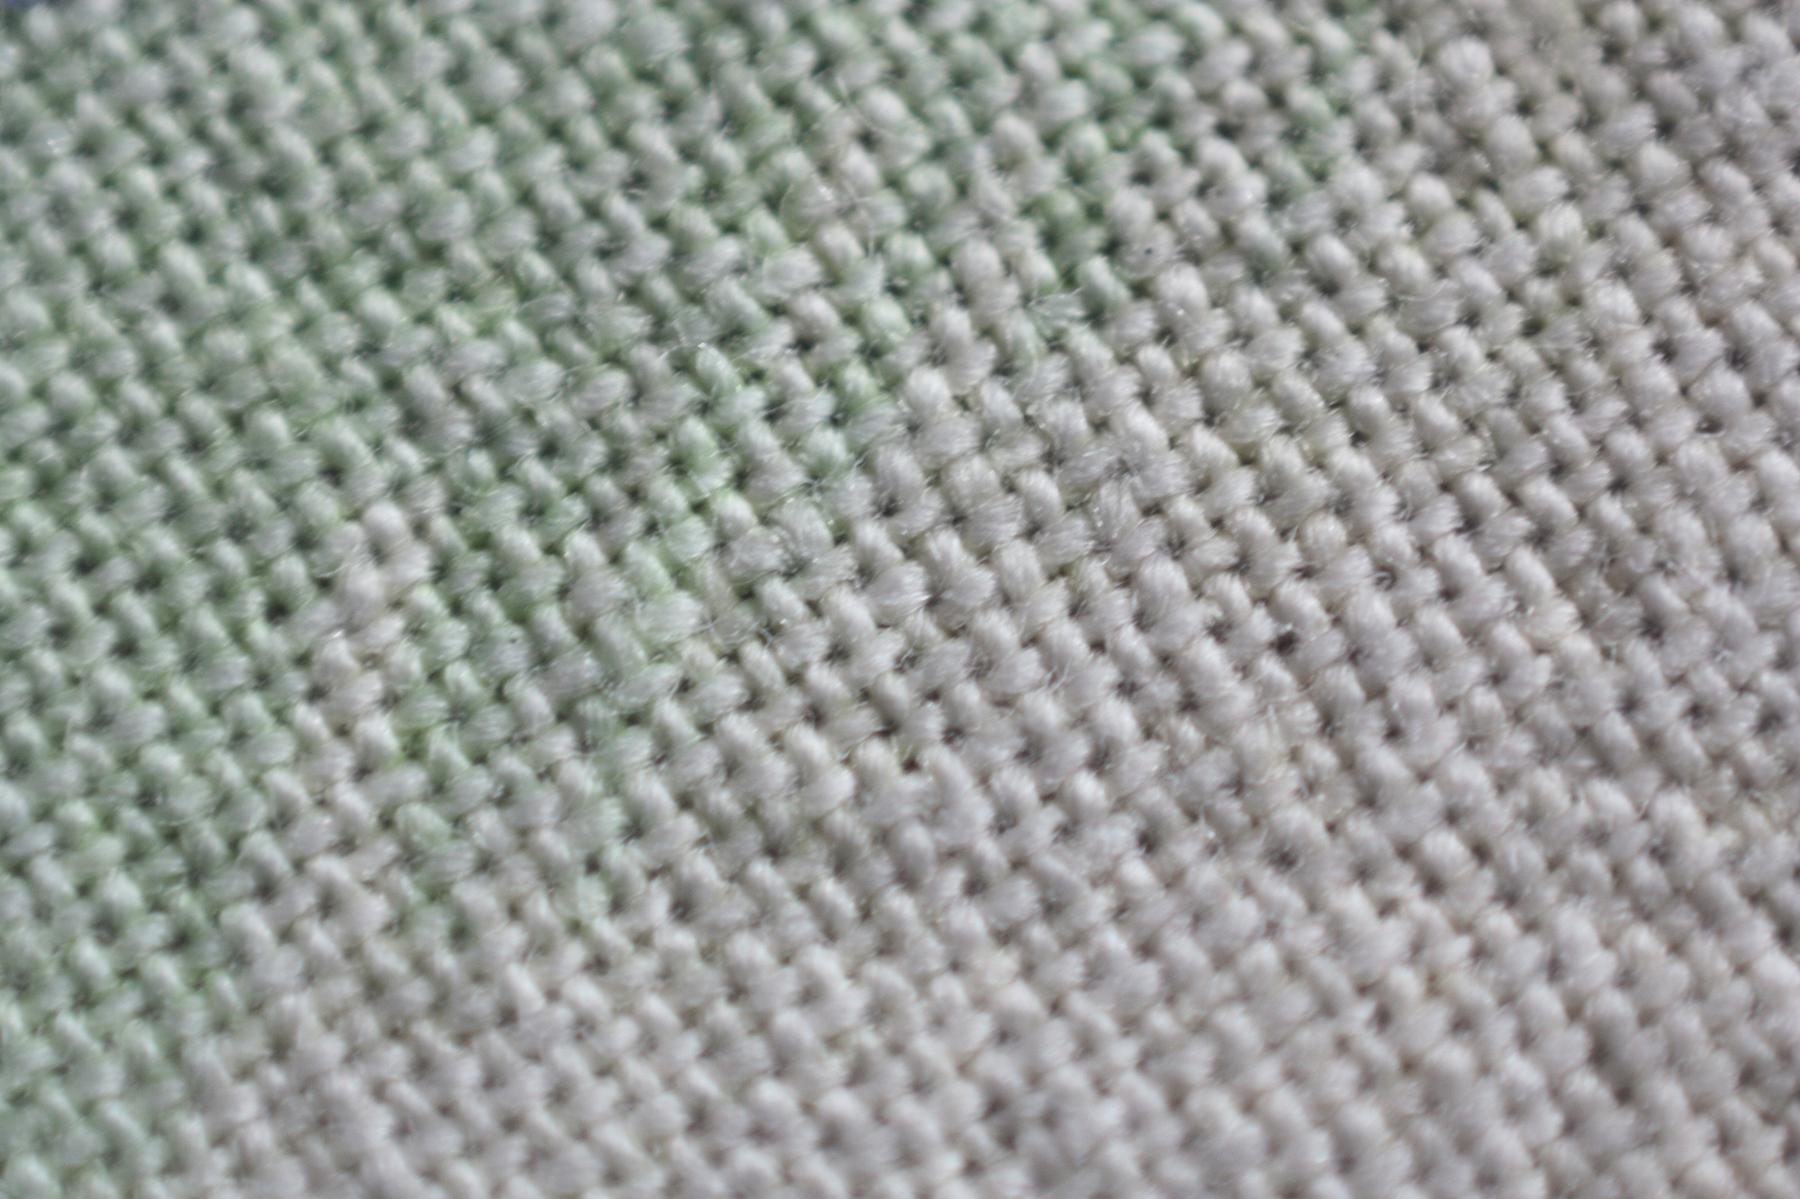 Image of Textile, Sustainable Textiles - File:Simple-textile-magnified.jpg